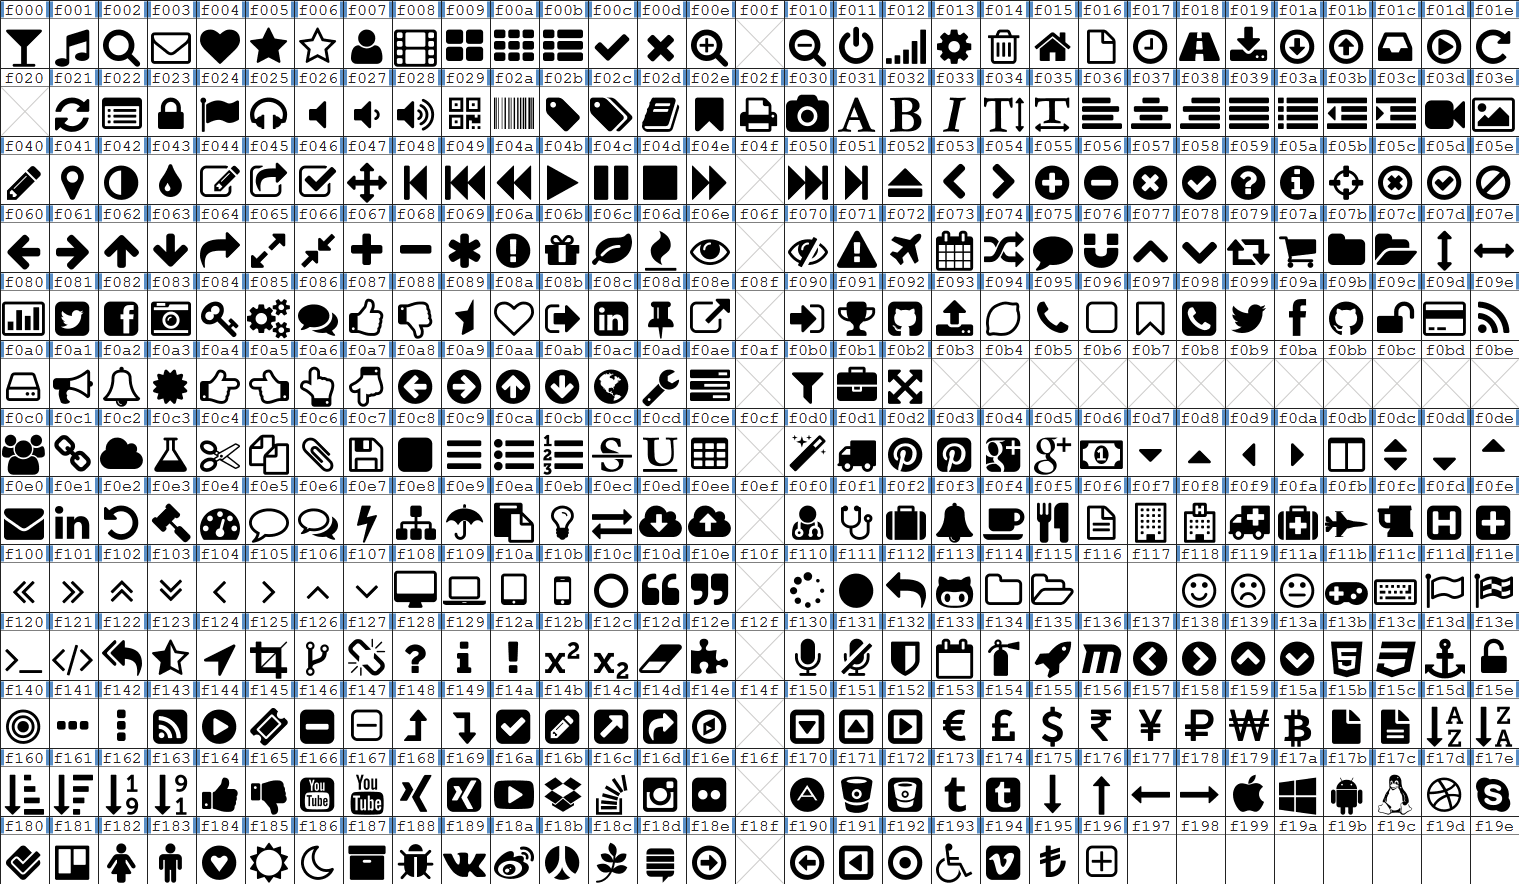 /img/icons.png